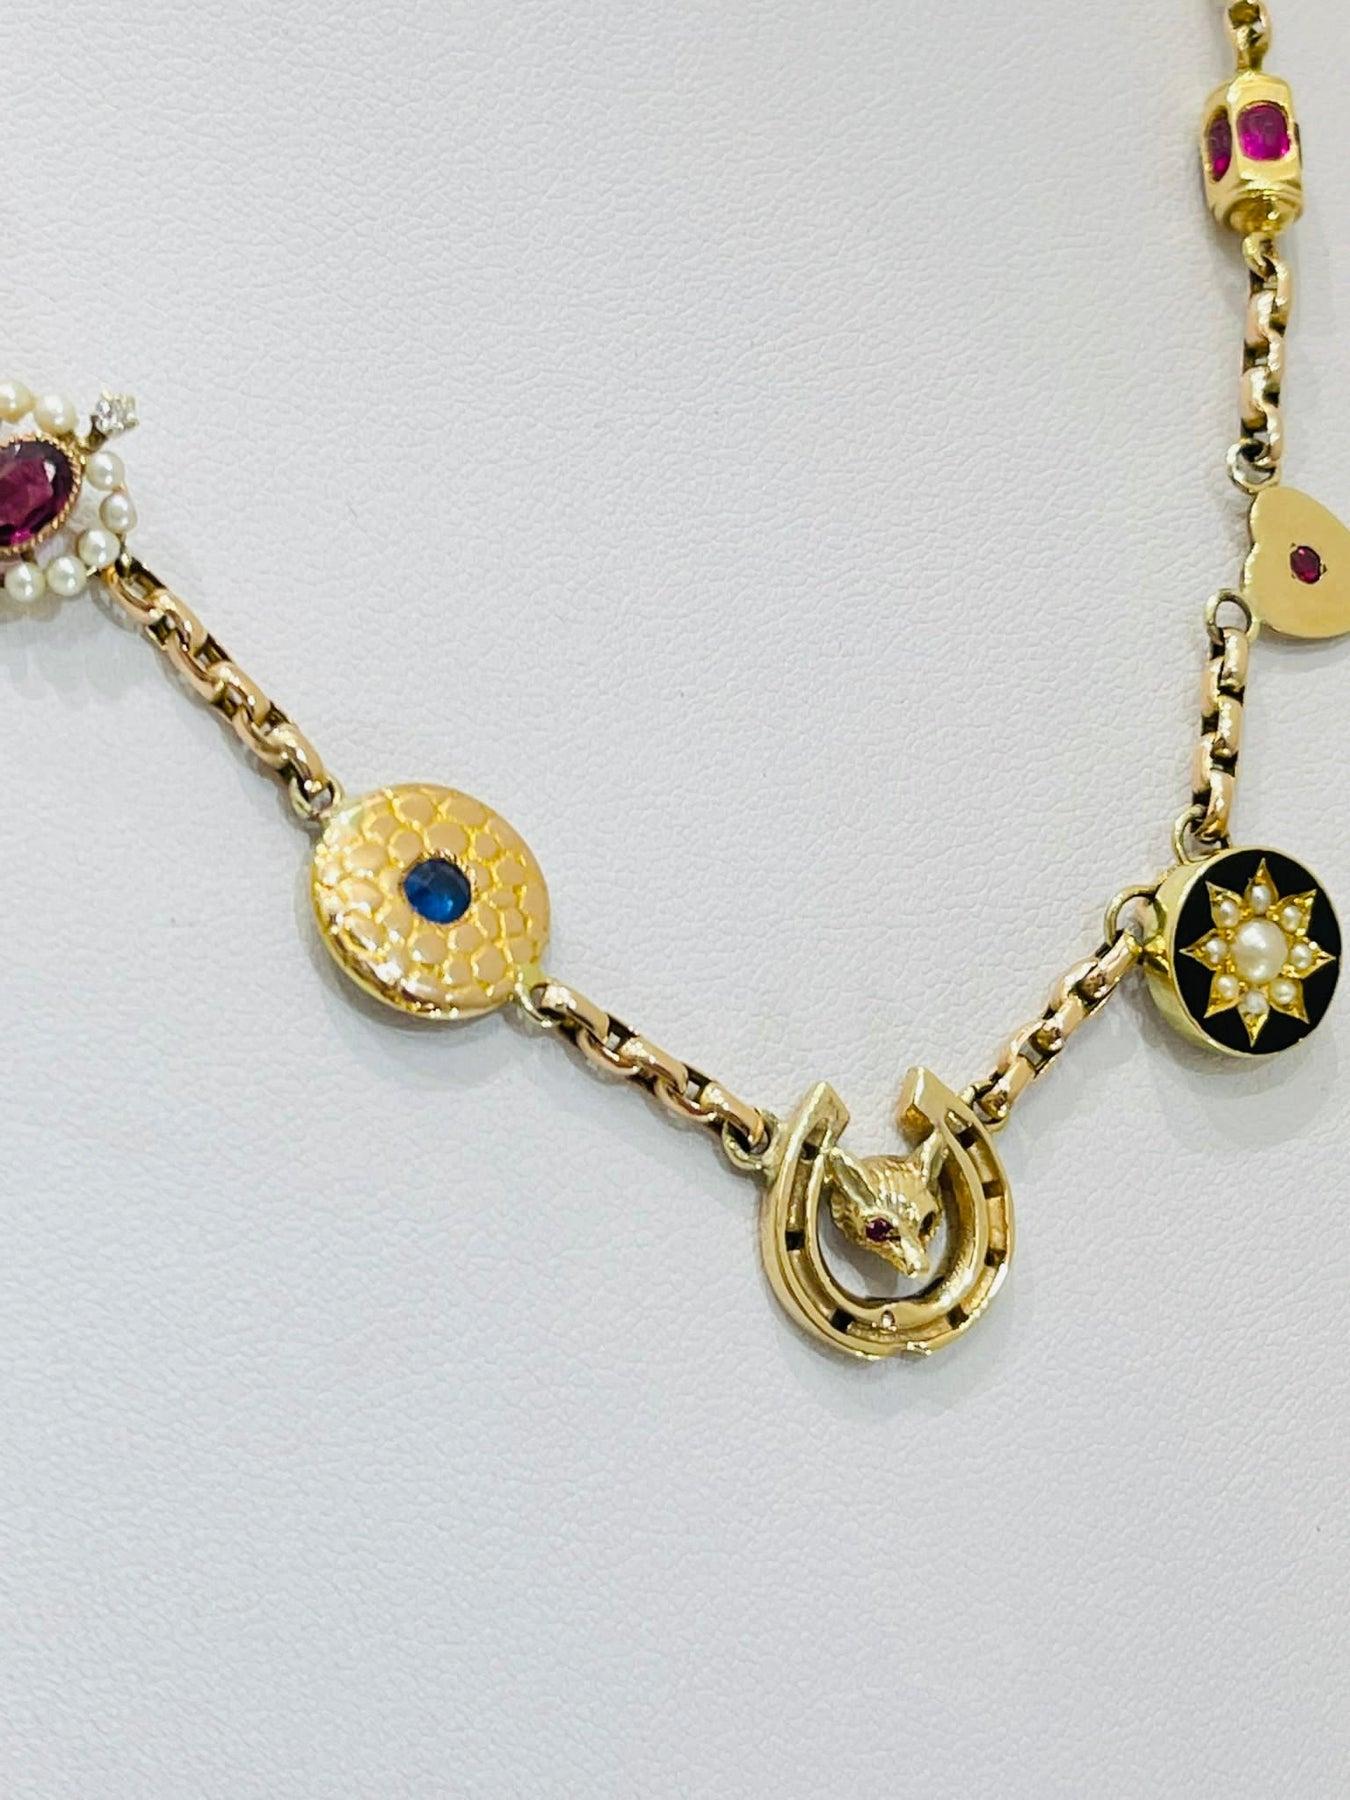 Brilliant Cut Victorian Charm Necklace 15ct Gold With Rubies, Sapphires & Pearls For Sale